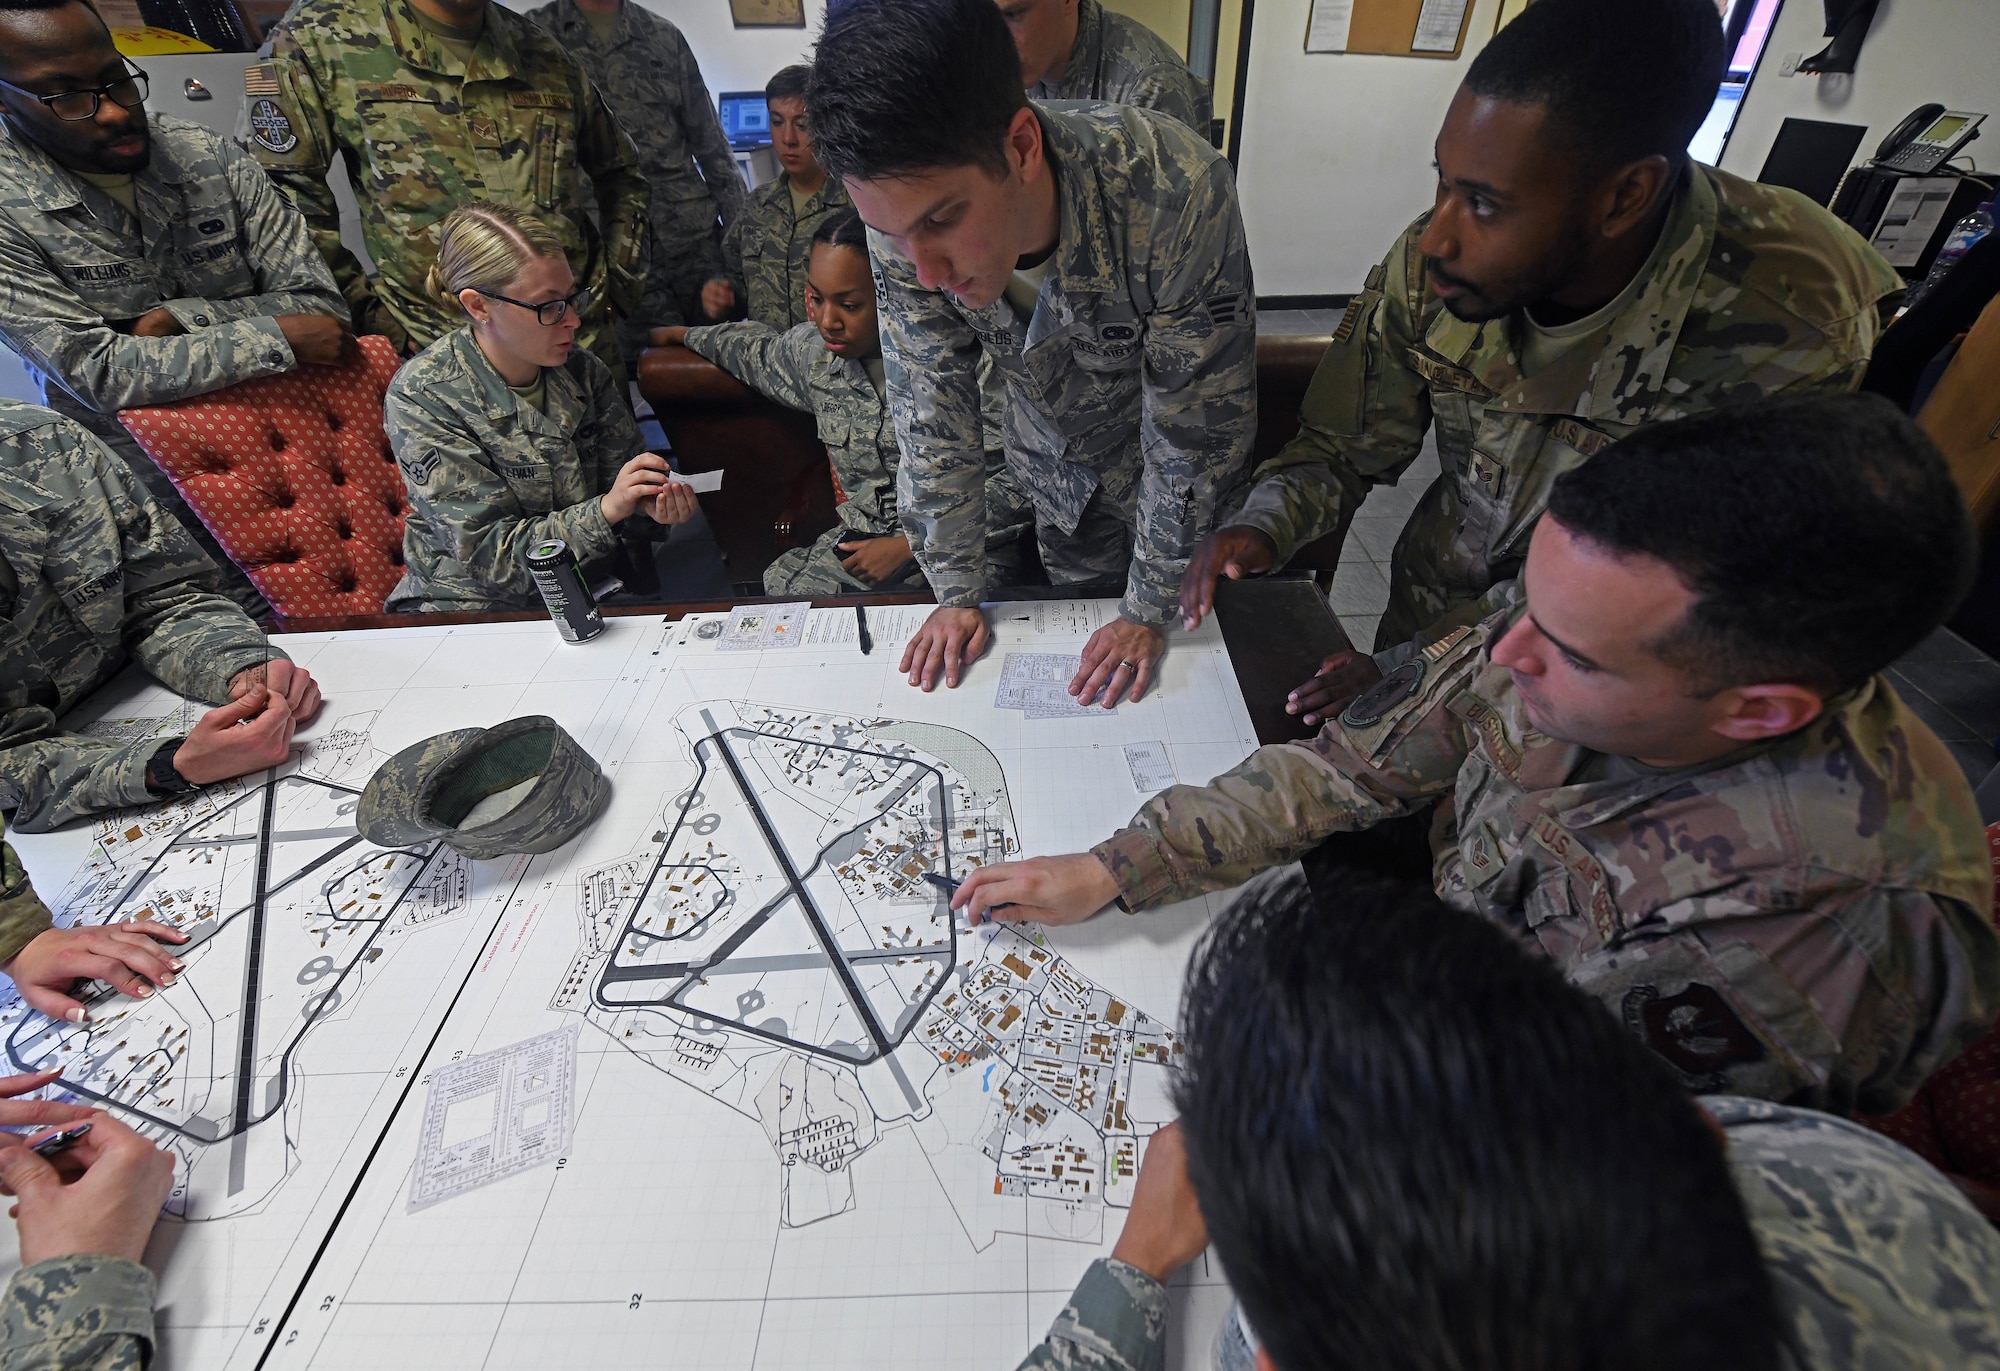 U.S. Air Force Staff Sgt. Arthur Singletary, 48th Logistics Readiness Squadron ground transportation operator, teaches Airmen from the 100th and 48th LRS navigation using a map during a Readiness Honed In Operations training day at RAF Lakenheath, England, July 13, 2019. Airmen received in-class training in conjunction with hands-on training such as to self-aid buddy care, advanced vehicle recovery using a tow truck and land navigation maps. (U.S. Air Force photo by Senior Airman Luke Milano)